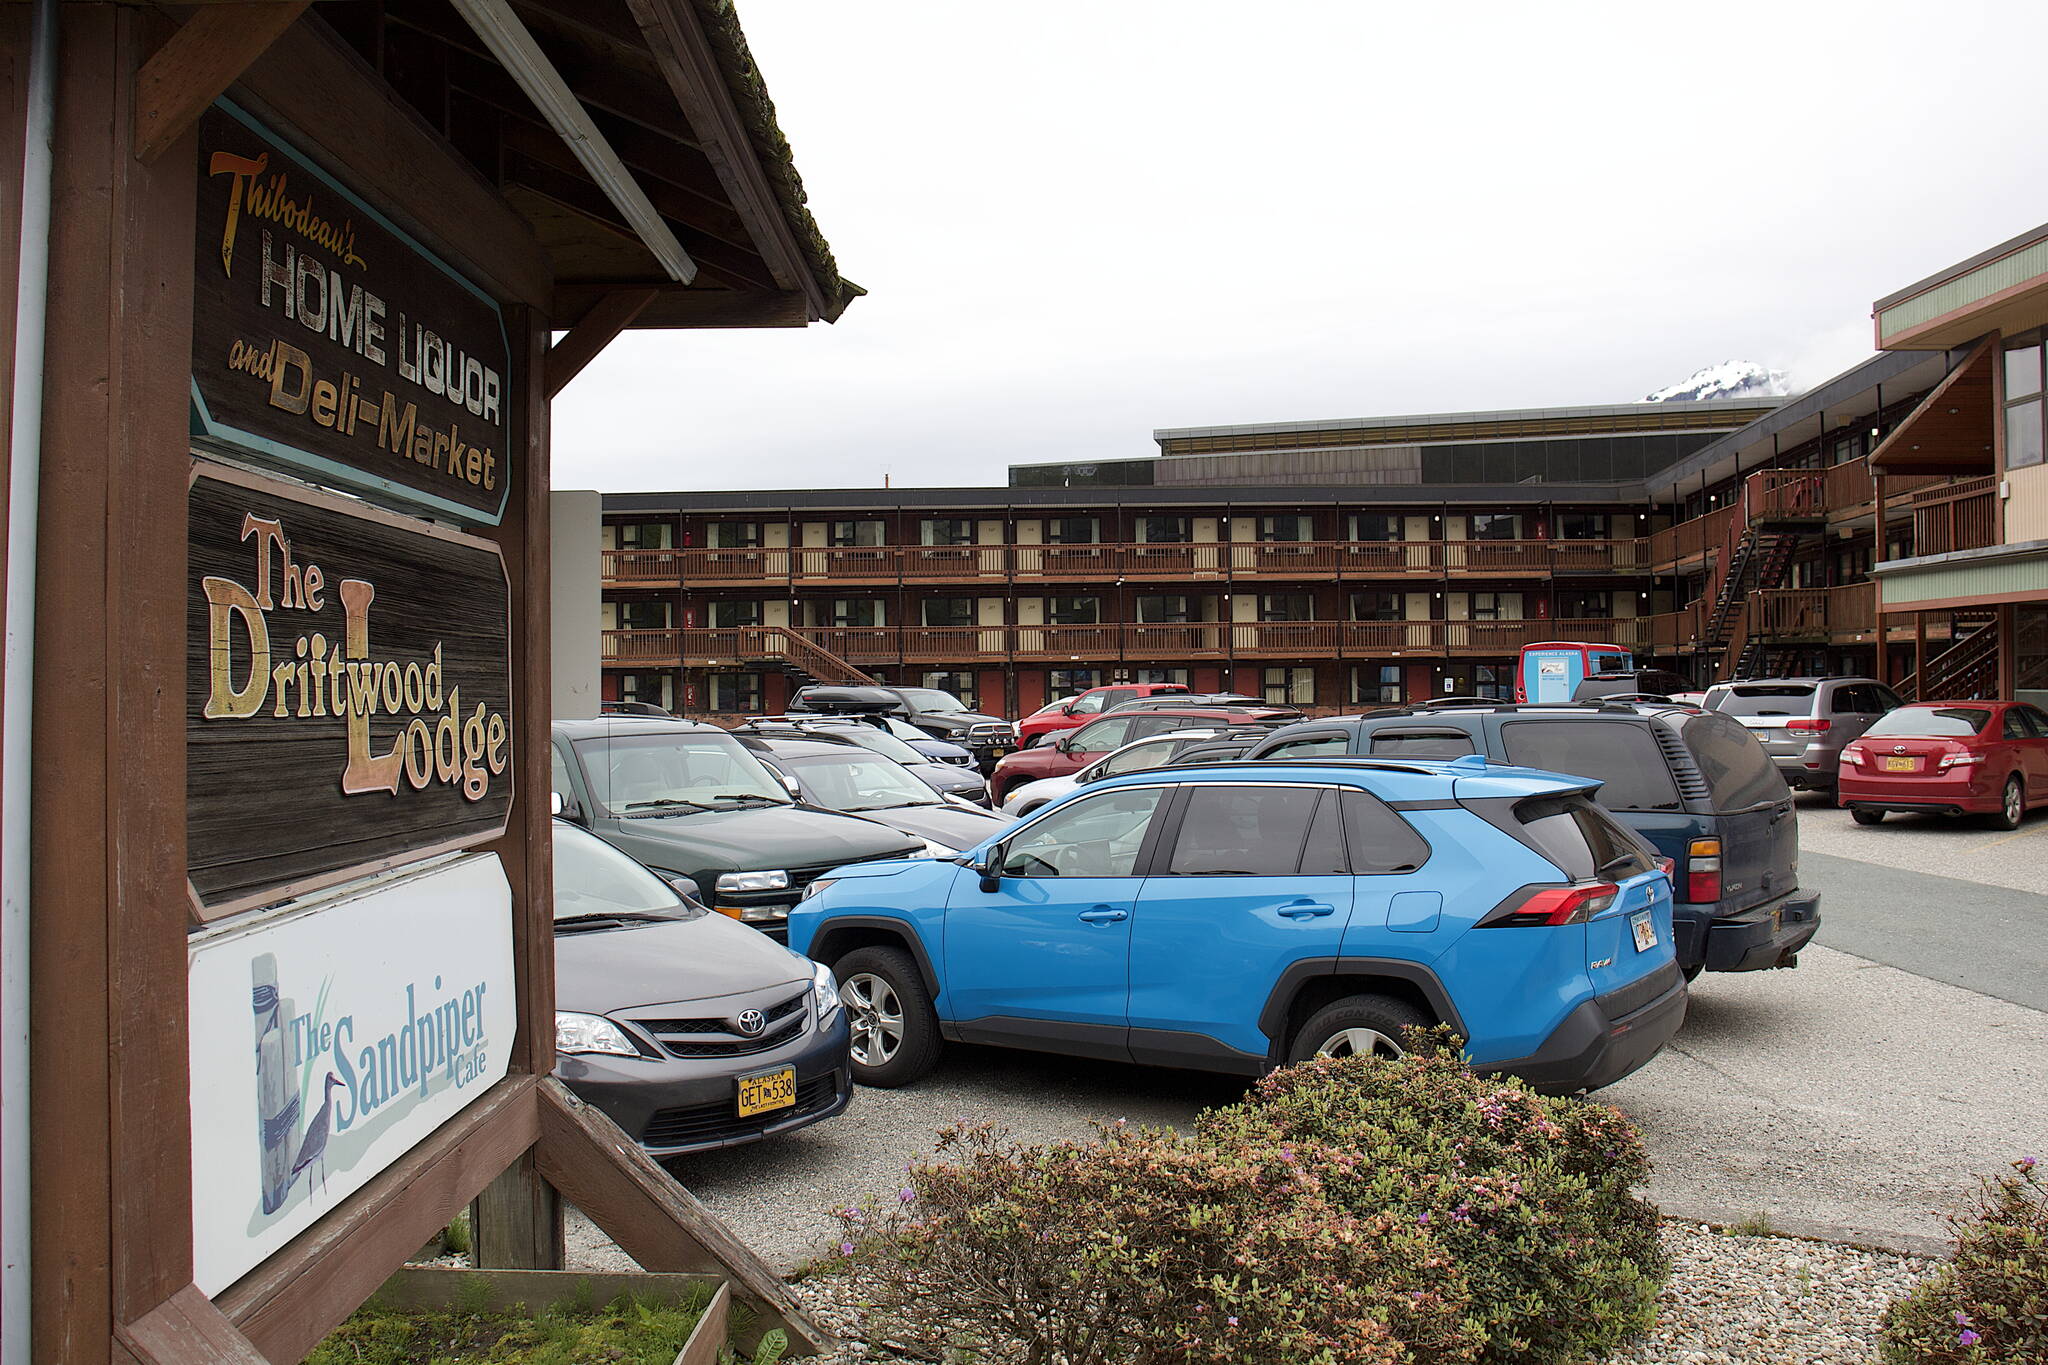 The Driftwood Lodge, used for decades by state lawmakers and others during legislative sessions, is not on this year’s official housing list provided by the Legislative Affairs Agency. (Mark Sabbatini / Juneau Empire)